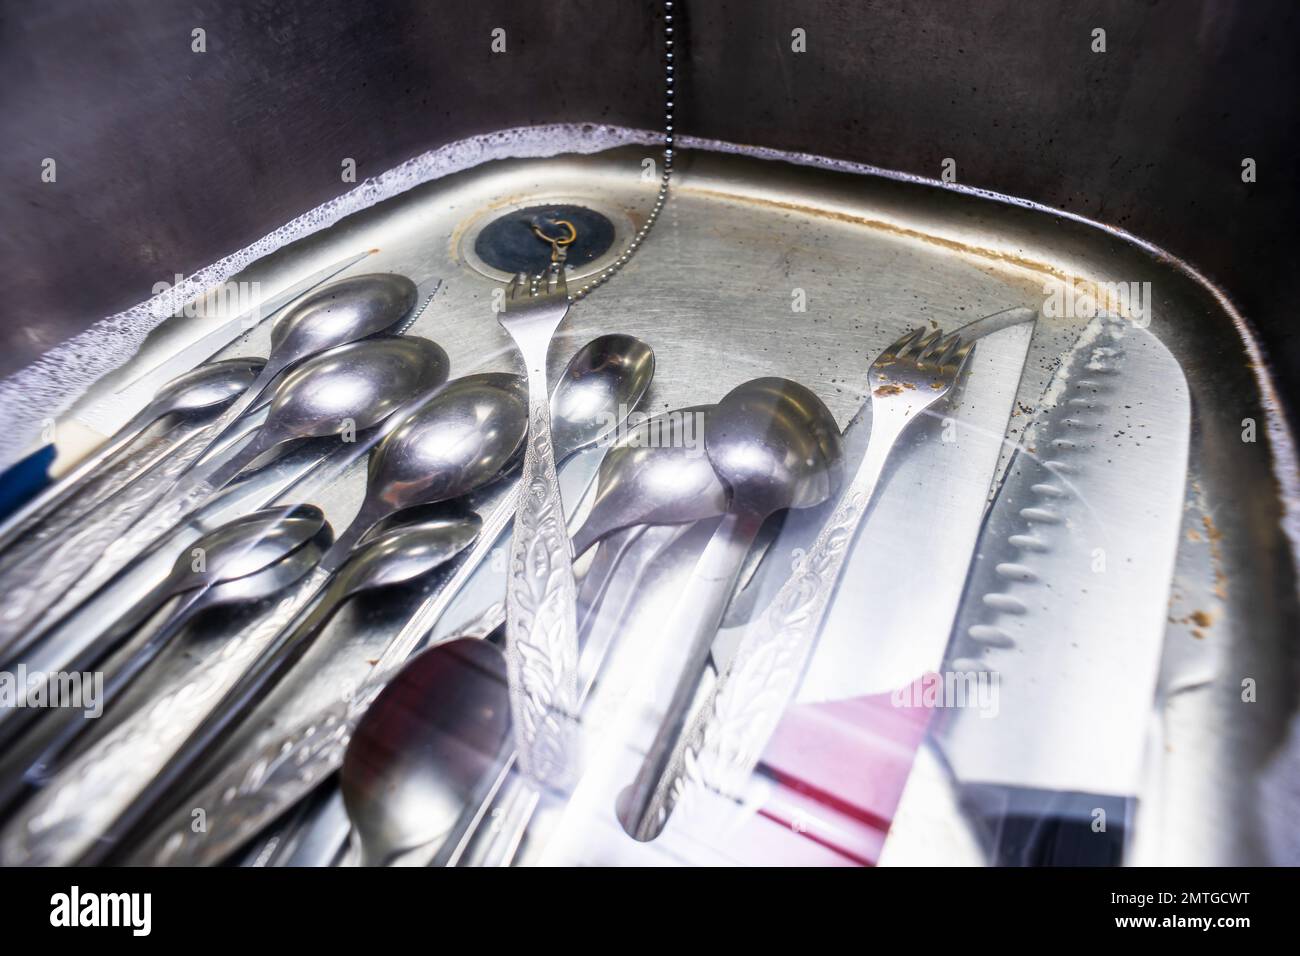 Dirty dishes in a kitchen sink filed with a water - wide angle Stock Photo